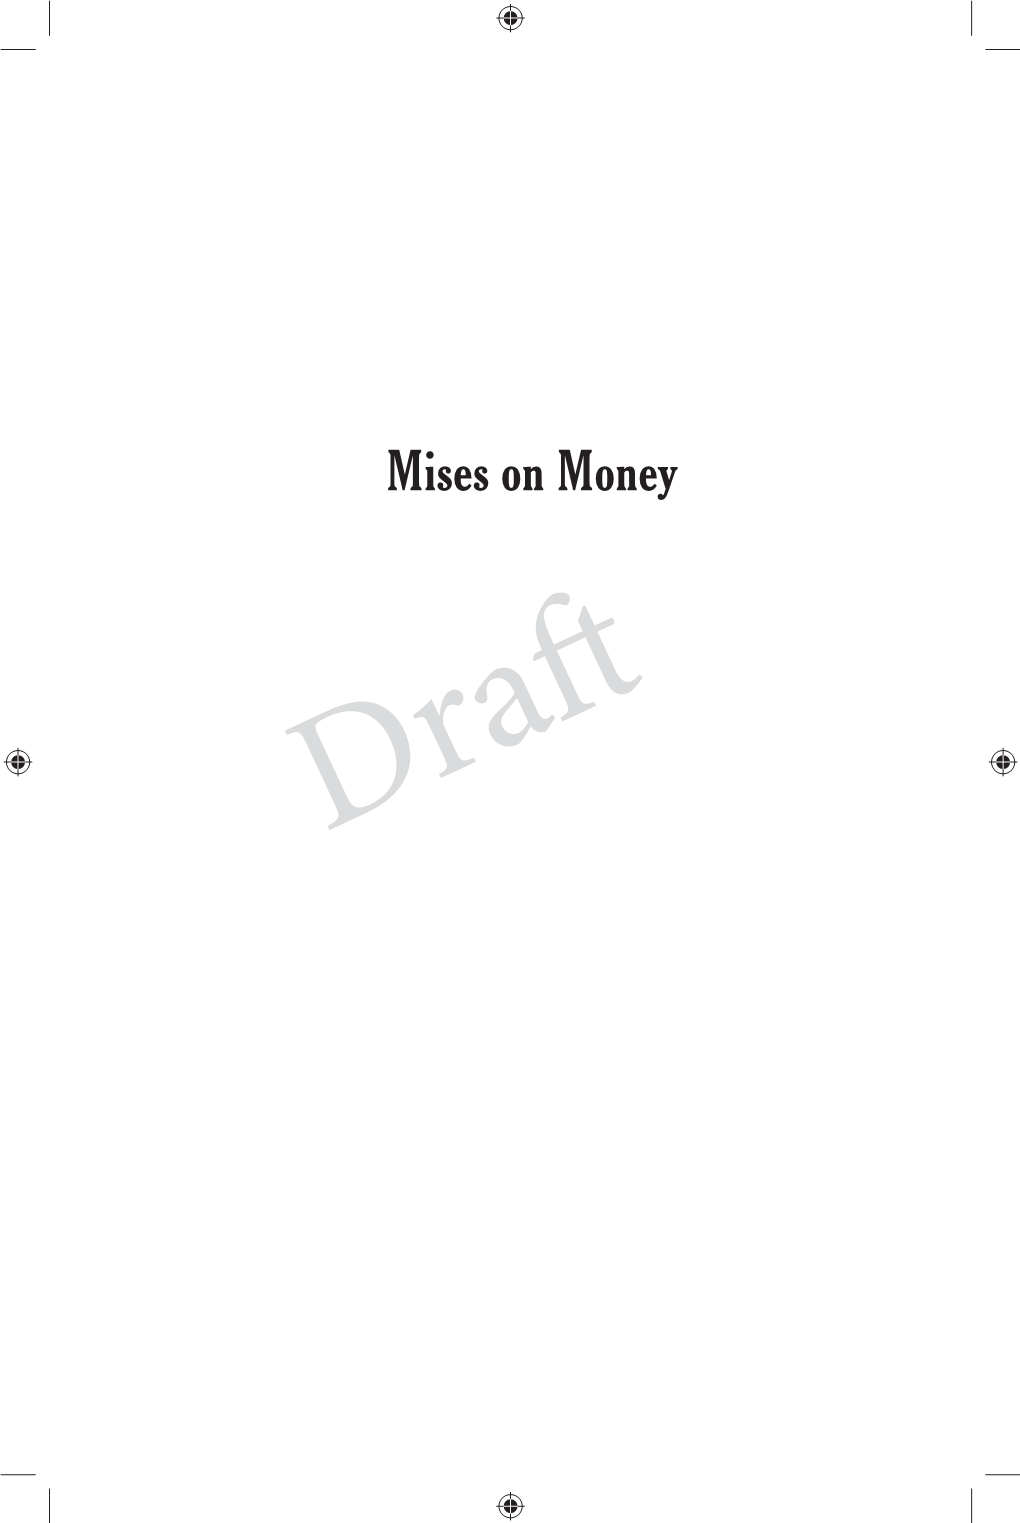 Mises on Money Vol 3 by Gary North